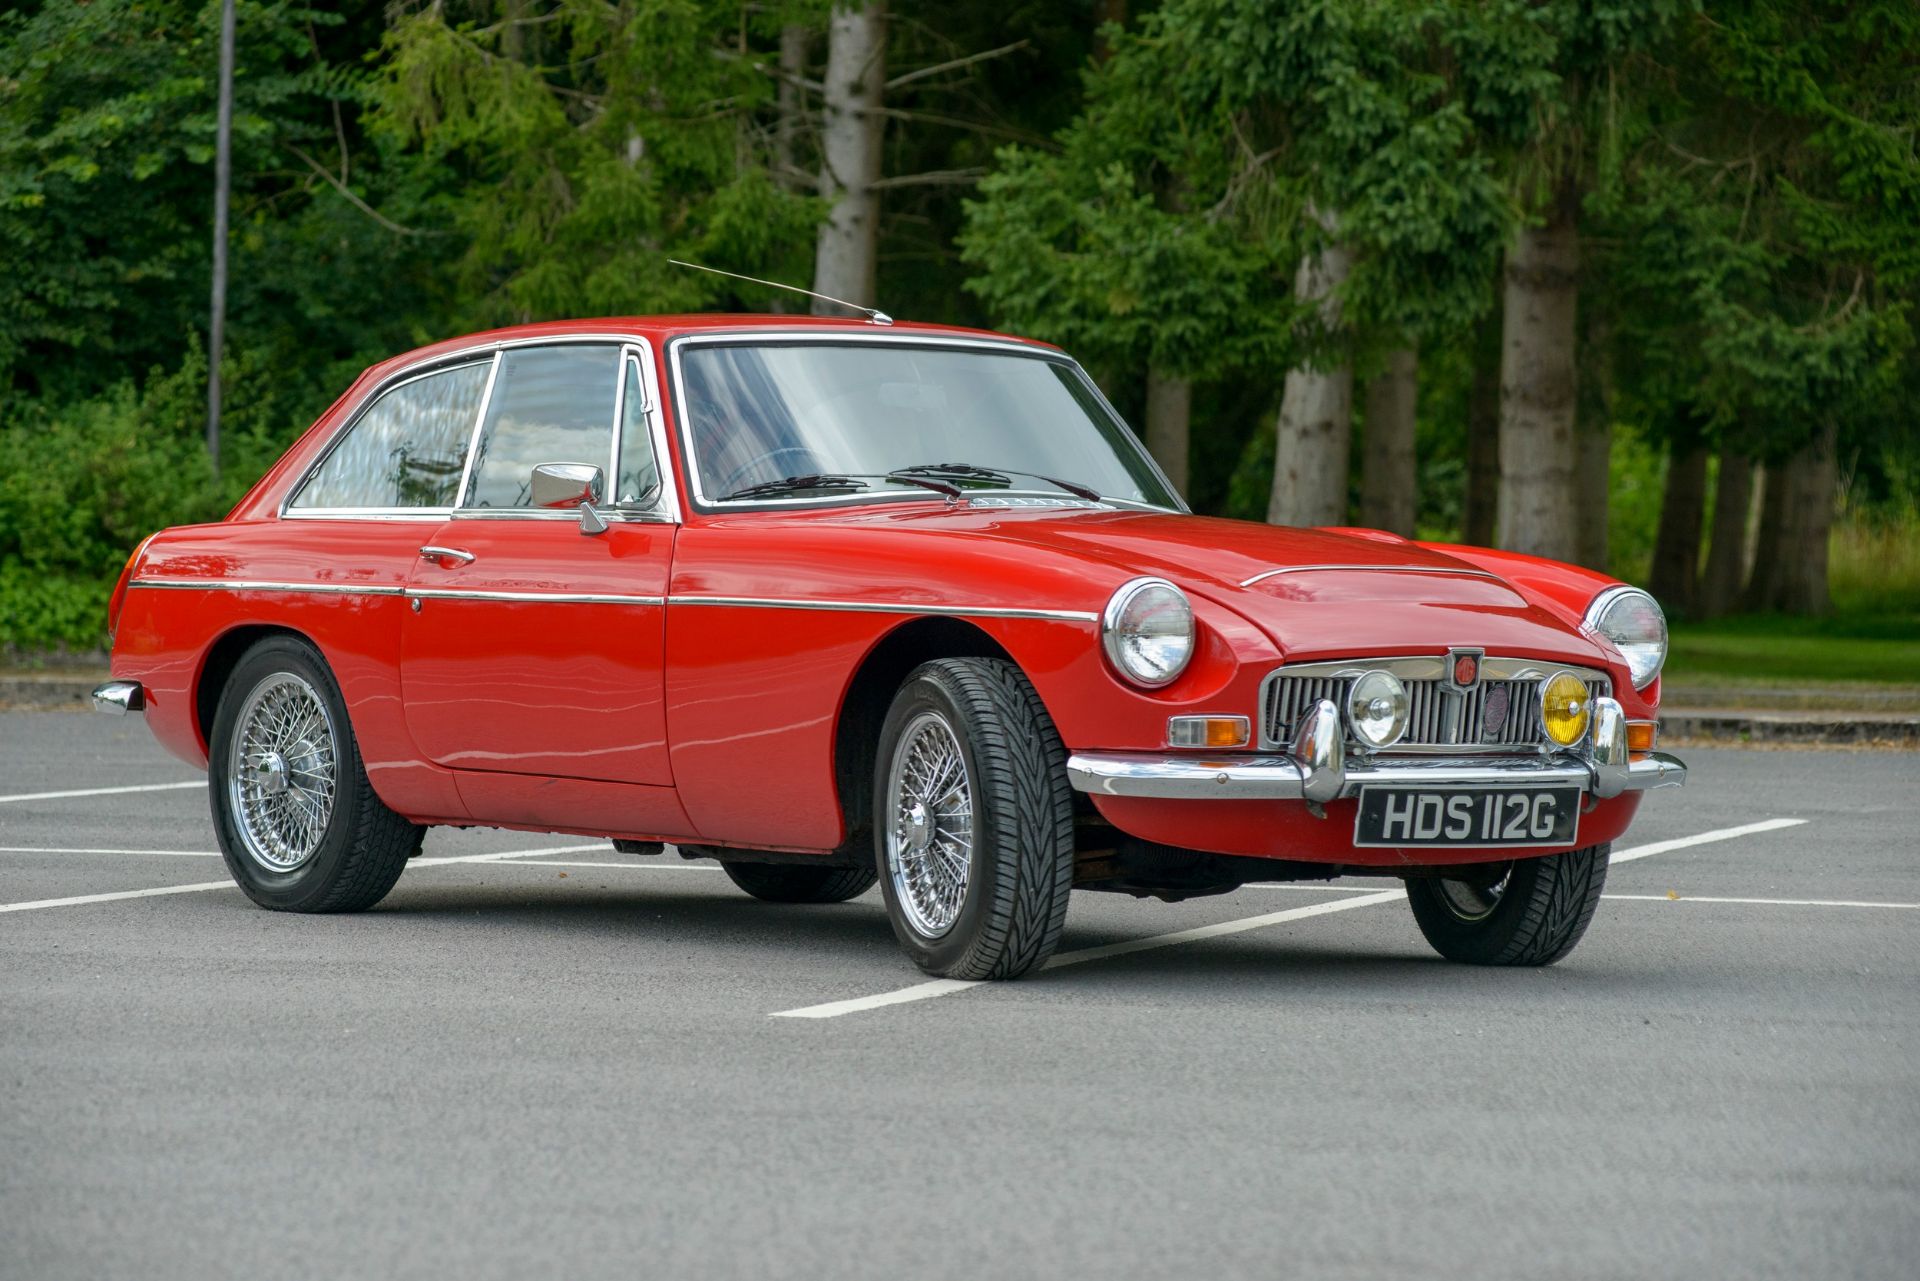 1968 MGC GT Registration Number: HDS 112G Chassis Number: GCD162359 Intended to replace the Austin-